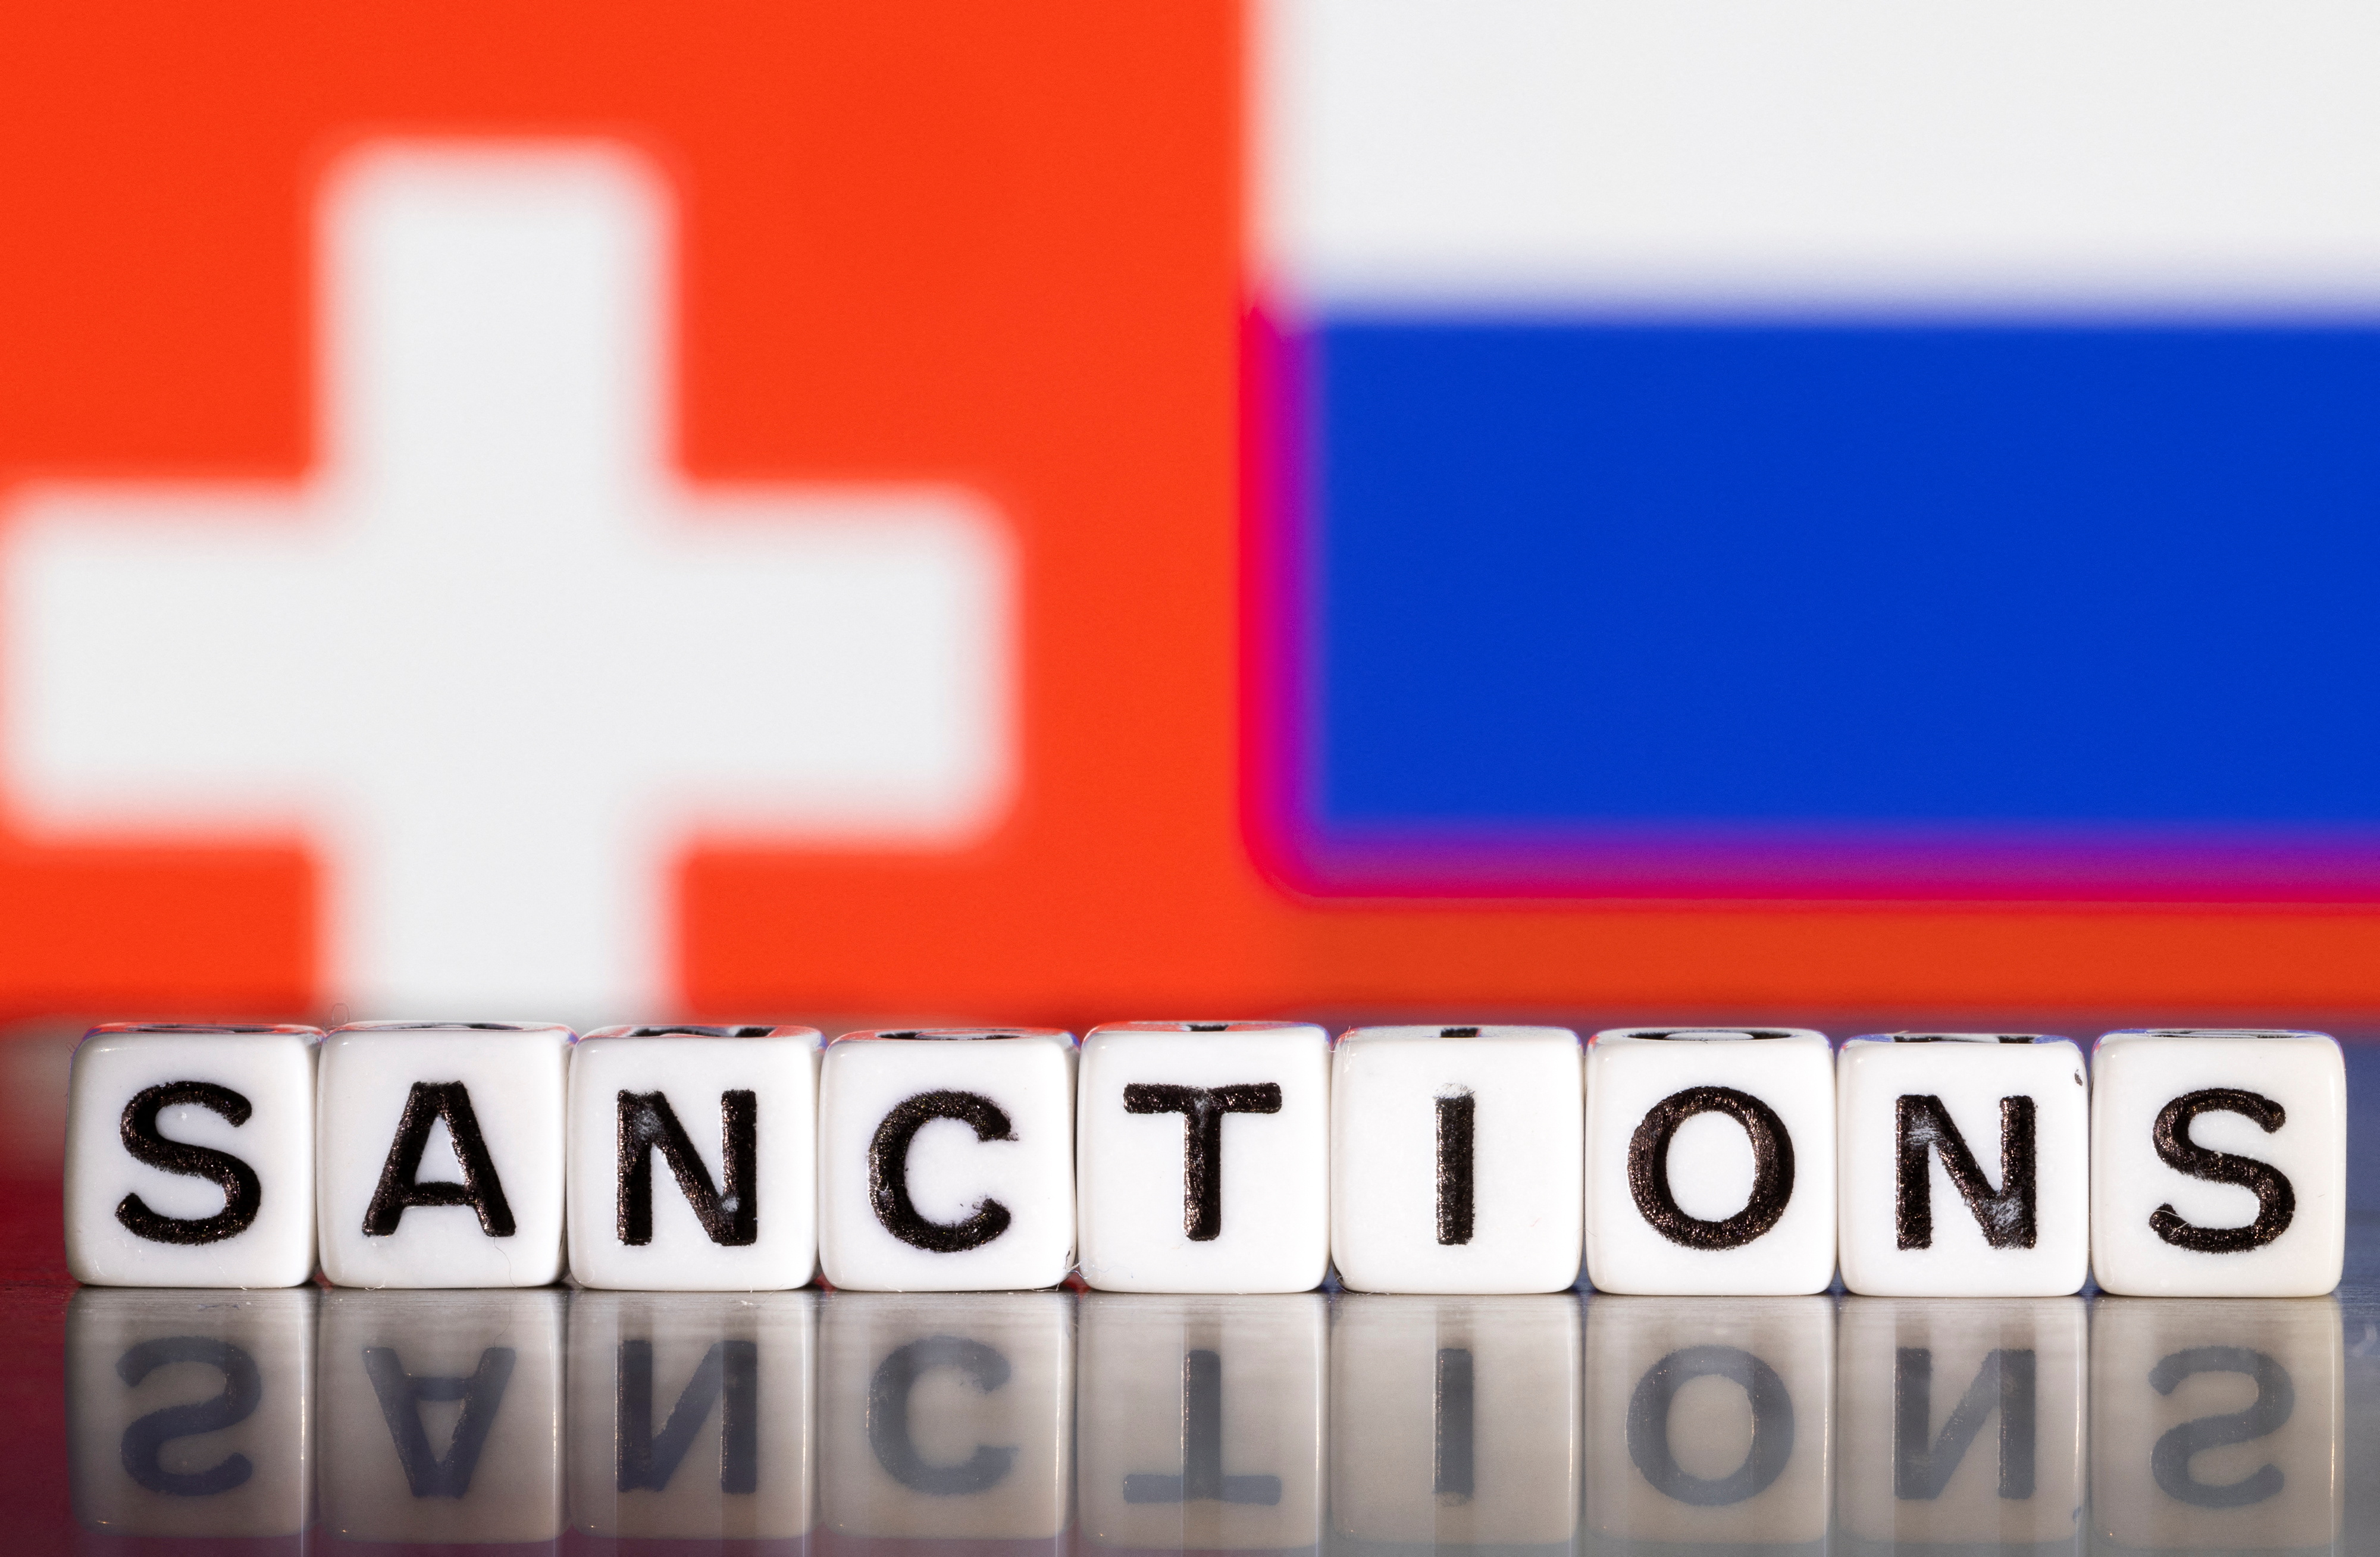 Illustration shows letters arranged to read "Sanctions" in front of flag colors of Switzerland and Russia